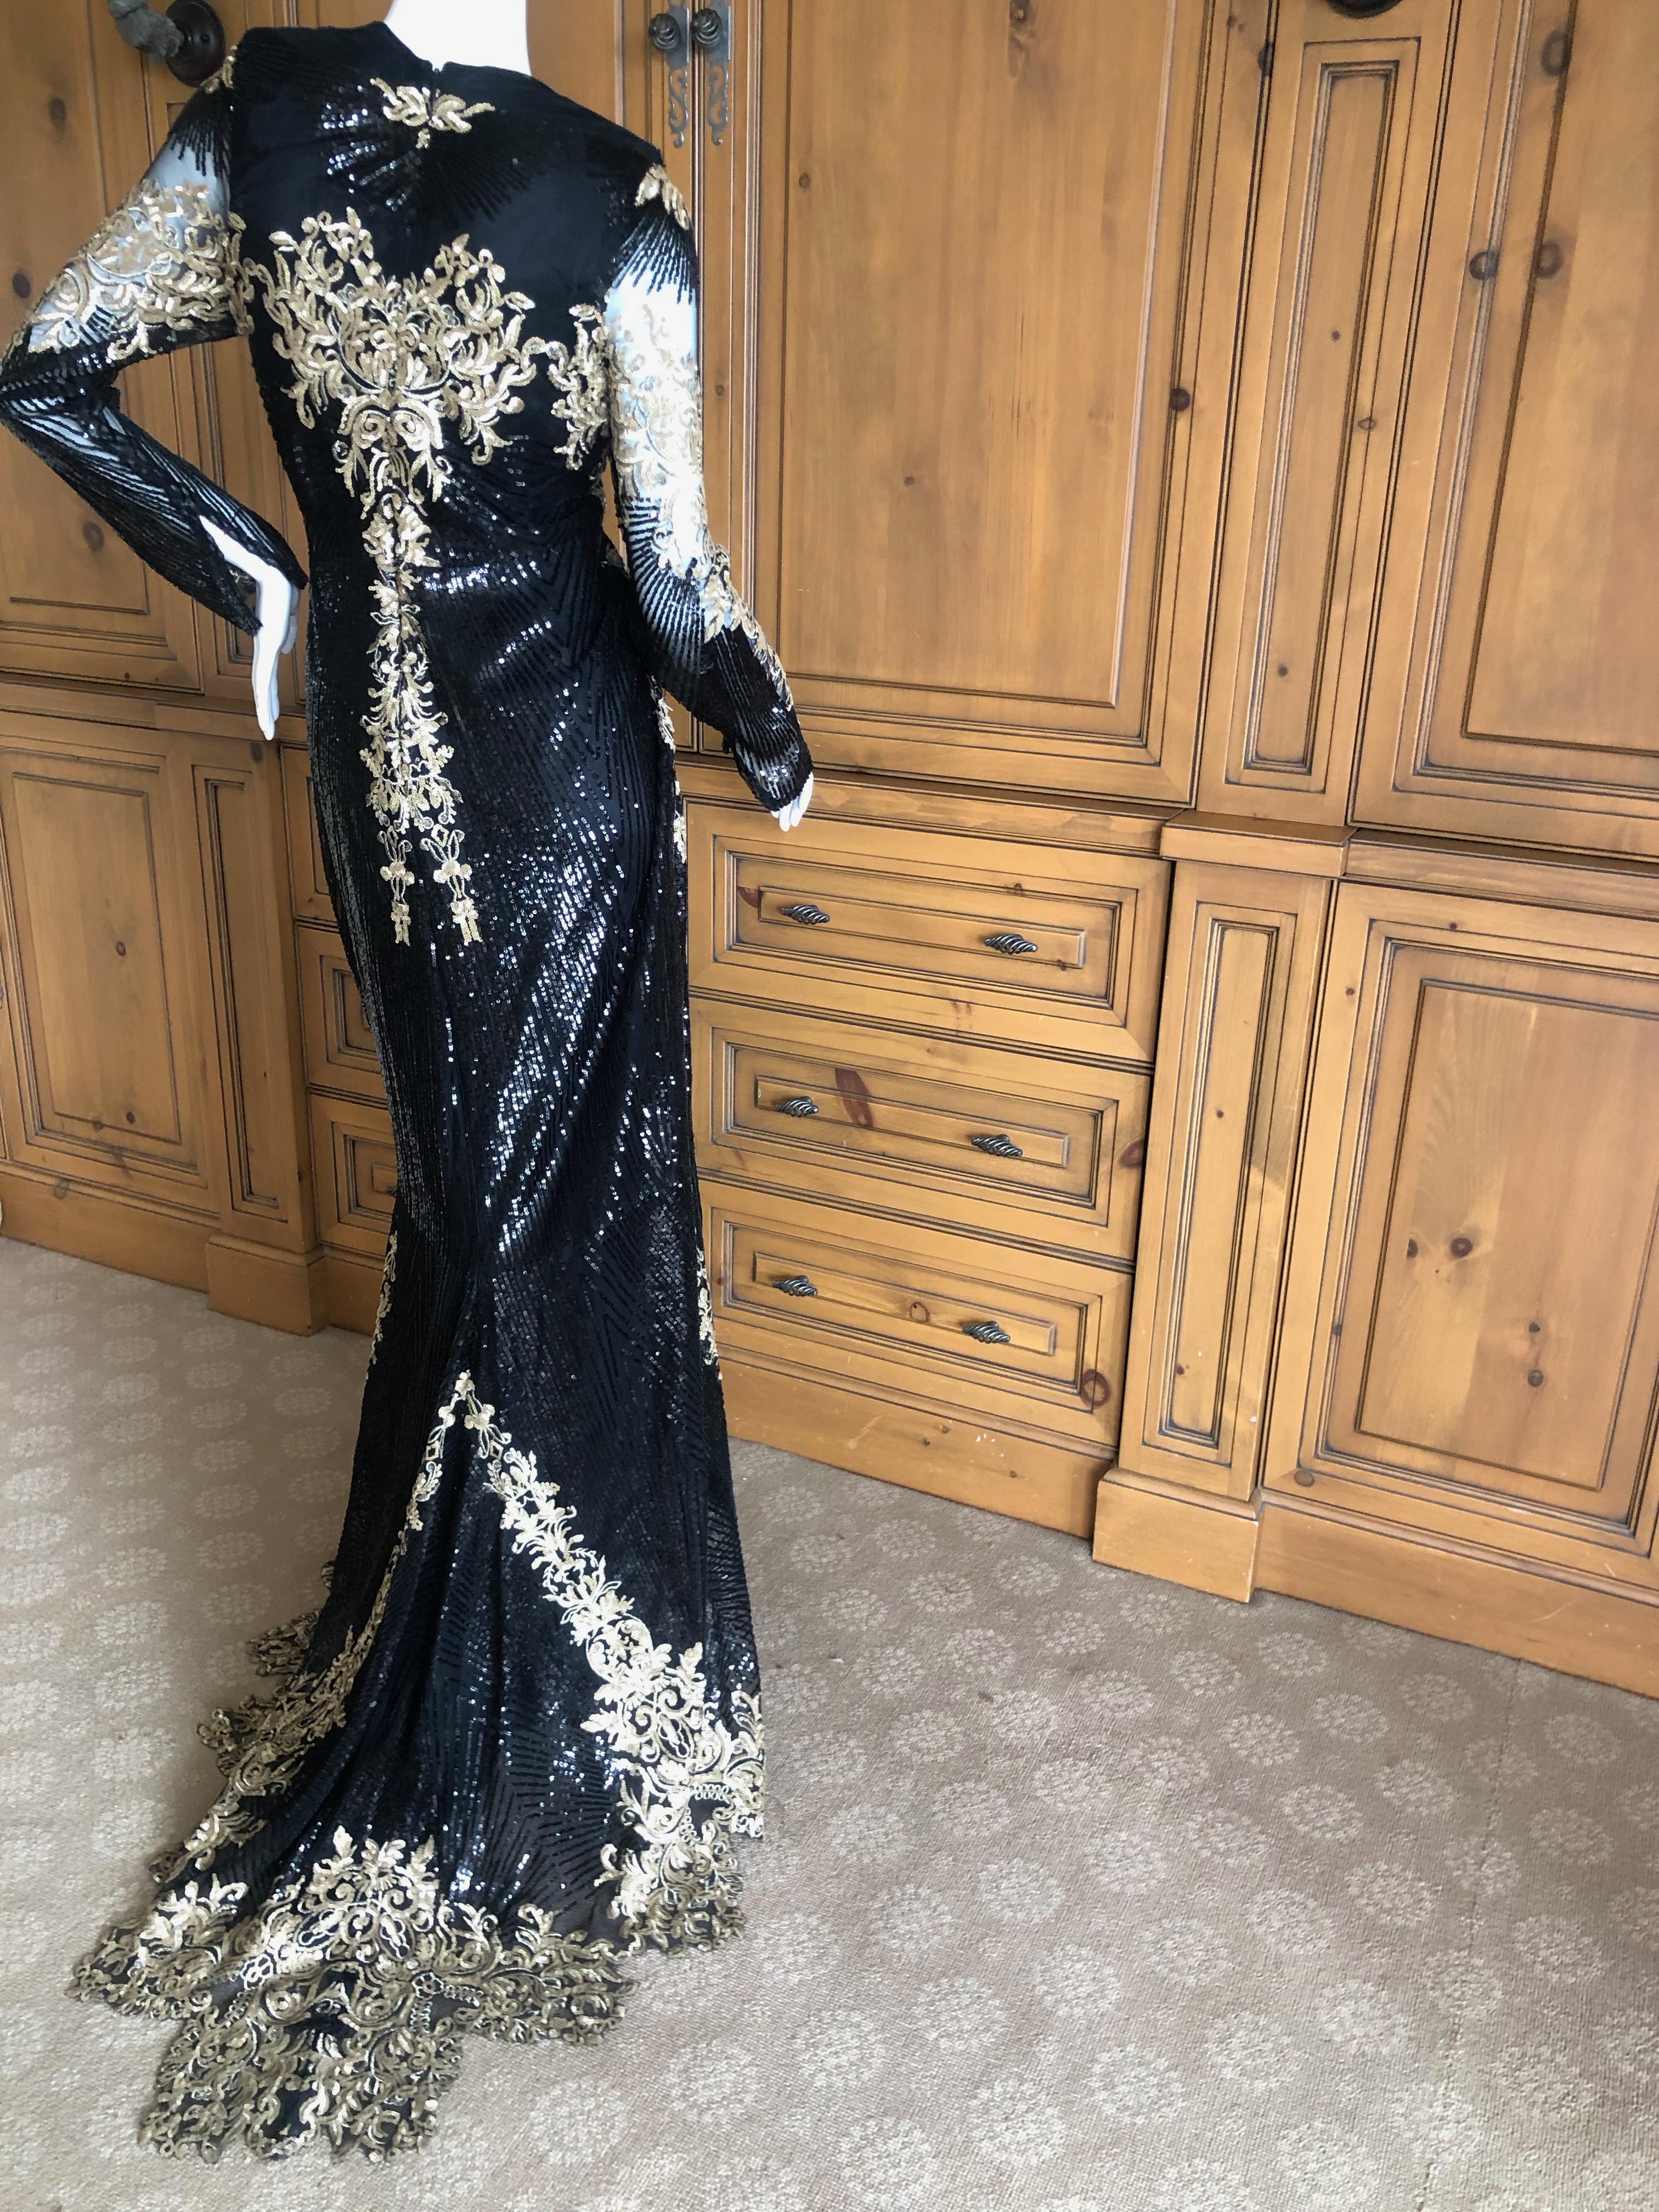 Christian Siriano Exquisitely Embellished Black and Gold Evening Dress w Train
So pretty ,there is a high slit, edged in gold lace scallops.
Please use the zoom feature to see the details, it is amazing.
Size L (no size tag)
 Bust 40